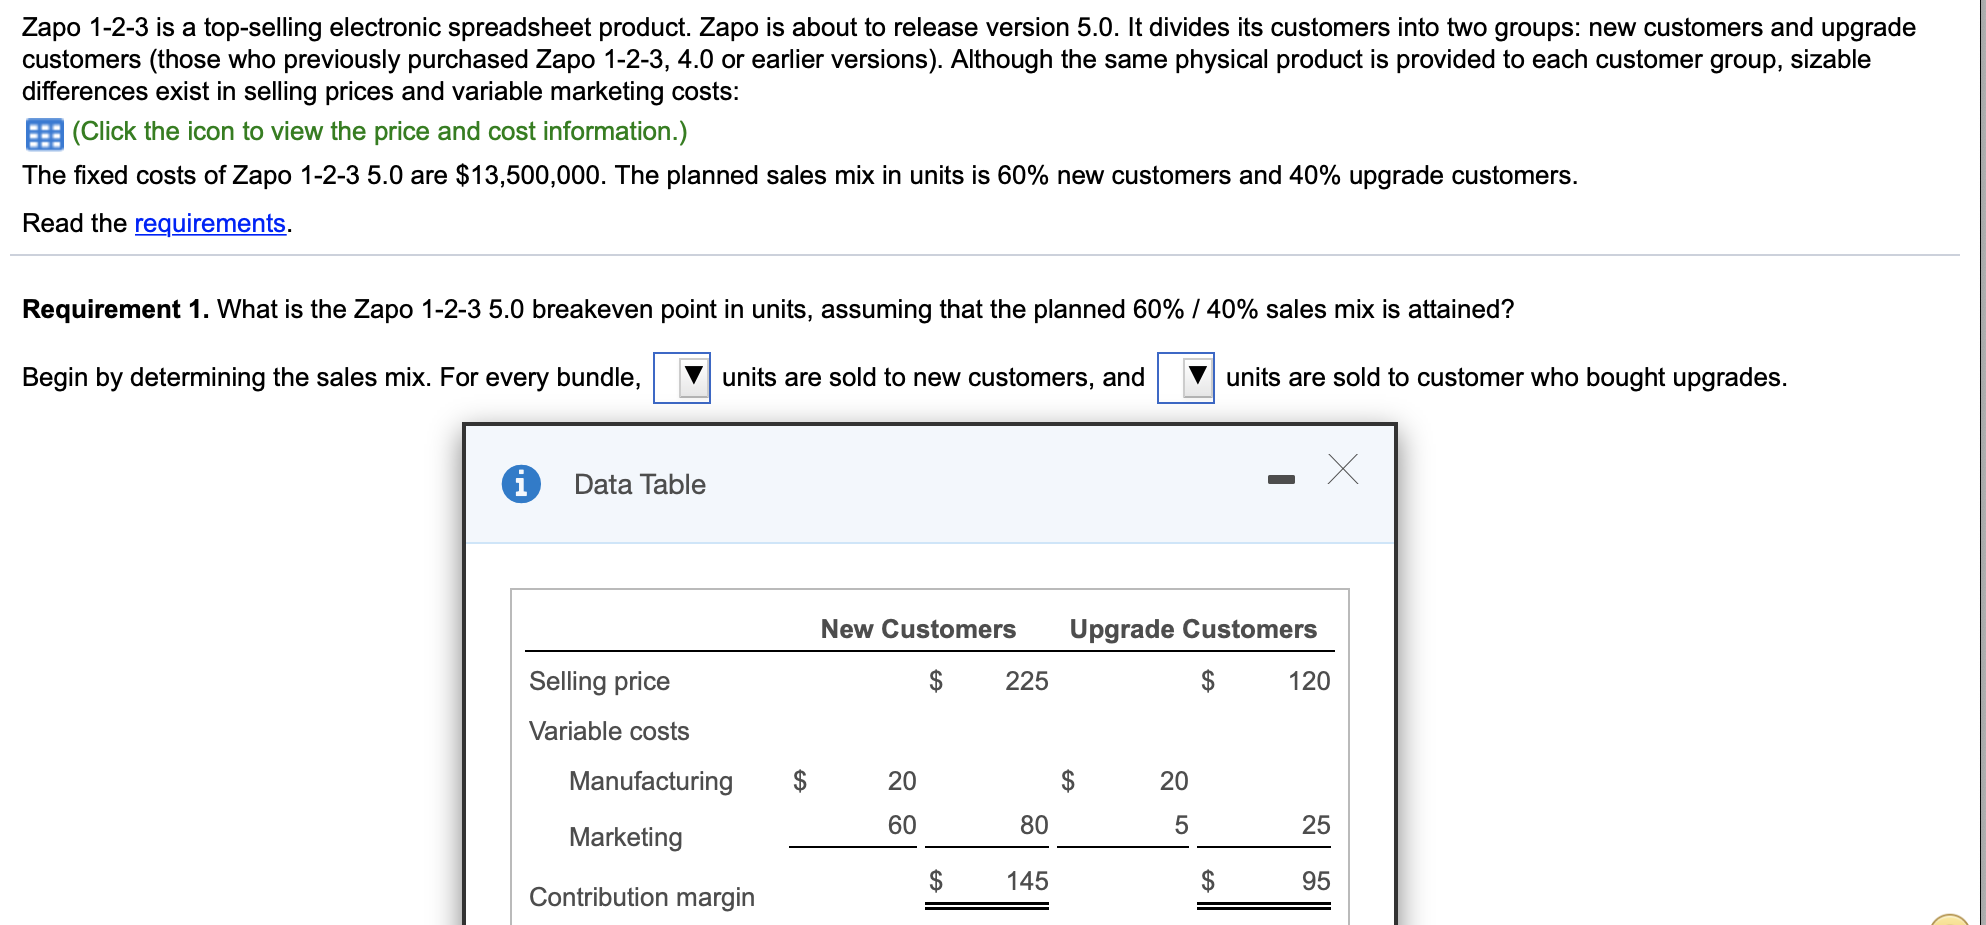 Requirement 1. What is the Zapo 1-2-3 5.0 breakeven point in units, assuming that the planned 60% / 40% sales mix is attained?
Begin by determining the sales mix. For every bundle,
units are sold to new customers, and
units are sold to customer who bought upgrac
Data Table
New Customers
Upgrade Customers
Selling price
225
$
120
Variable costs
Manufacturing
$ 20
$
20
%24
